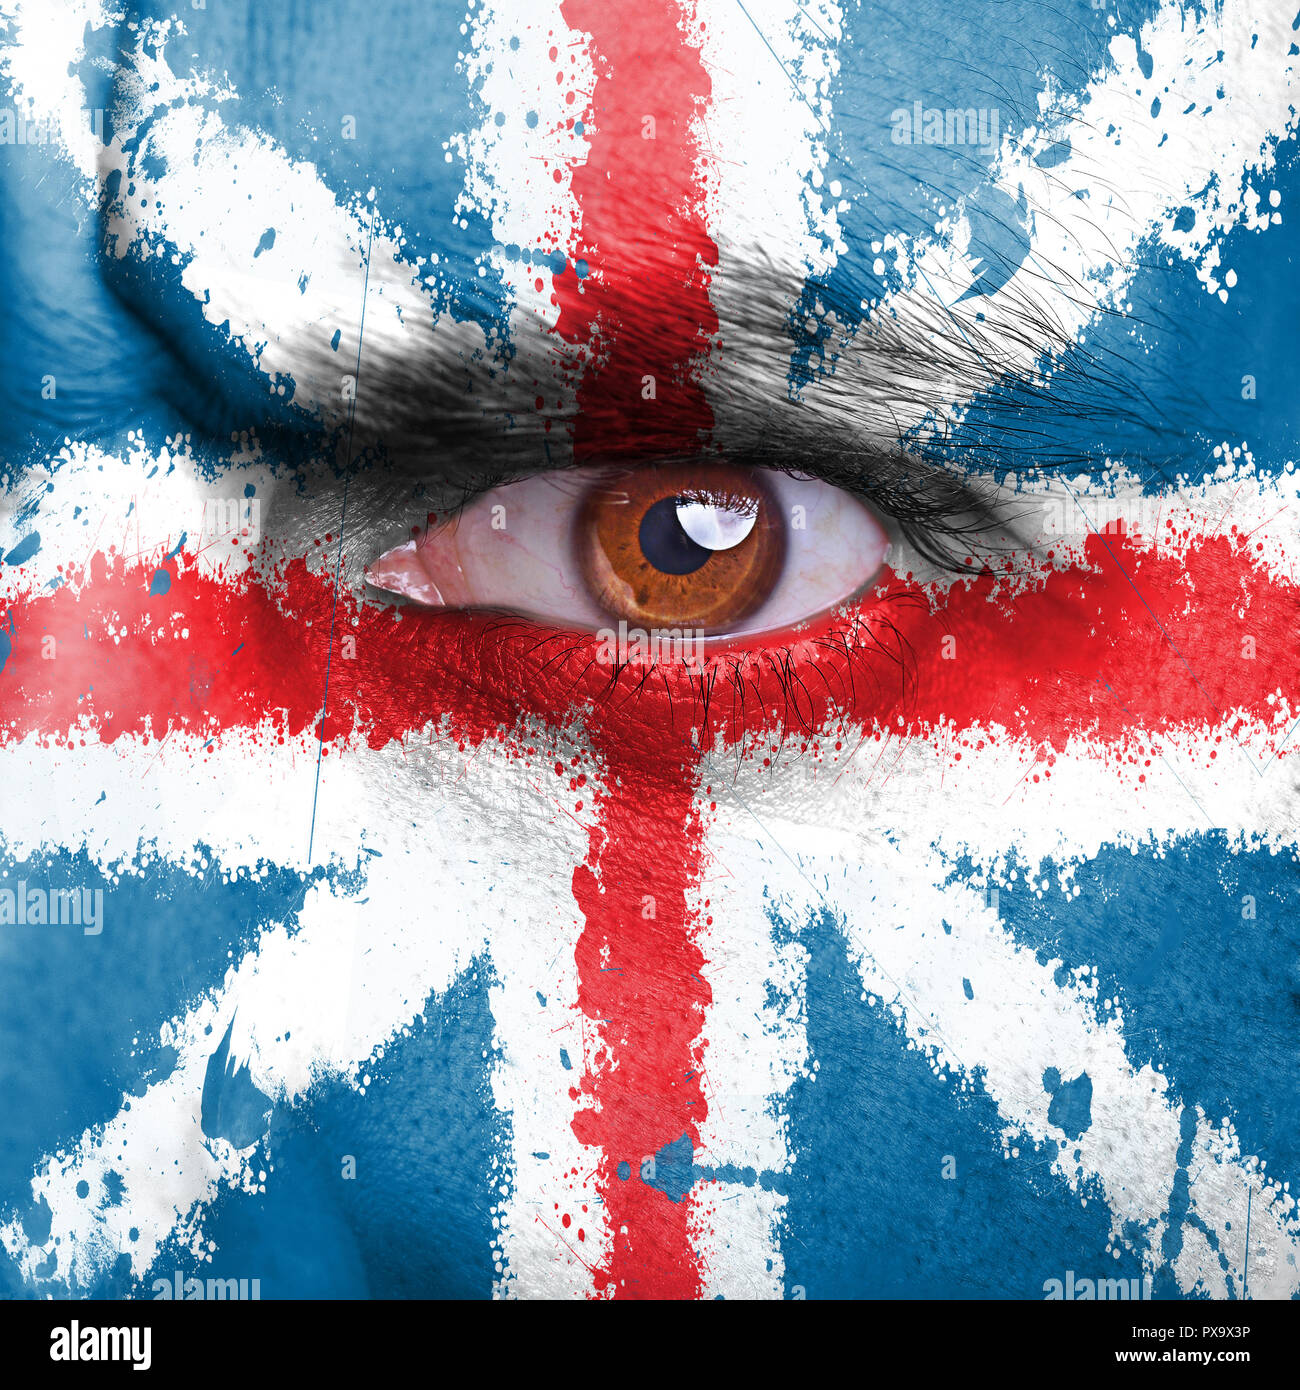 England flag painted on angry man face Stock Photo